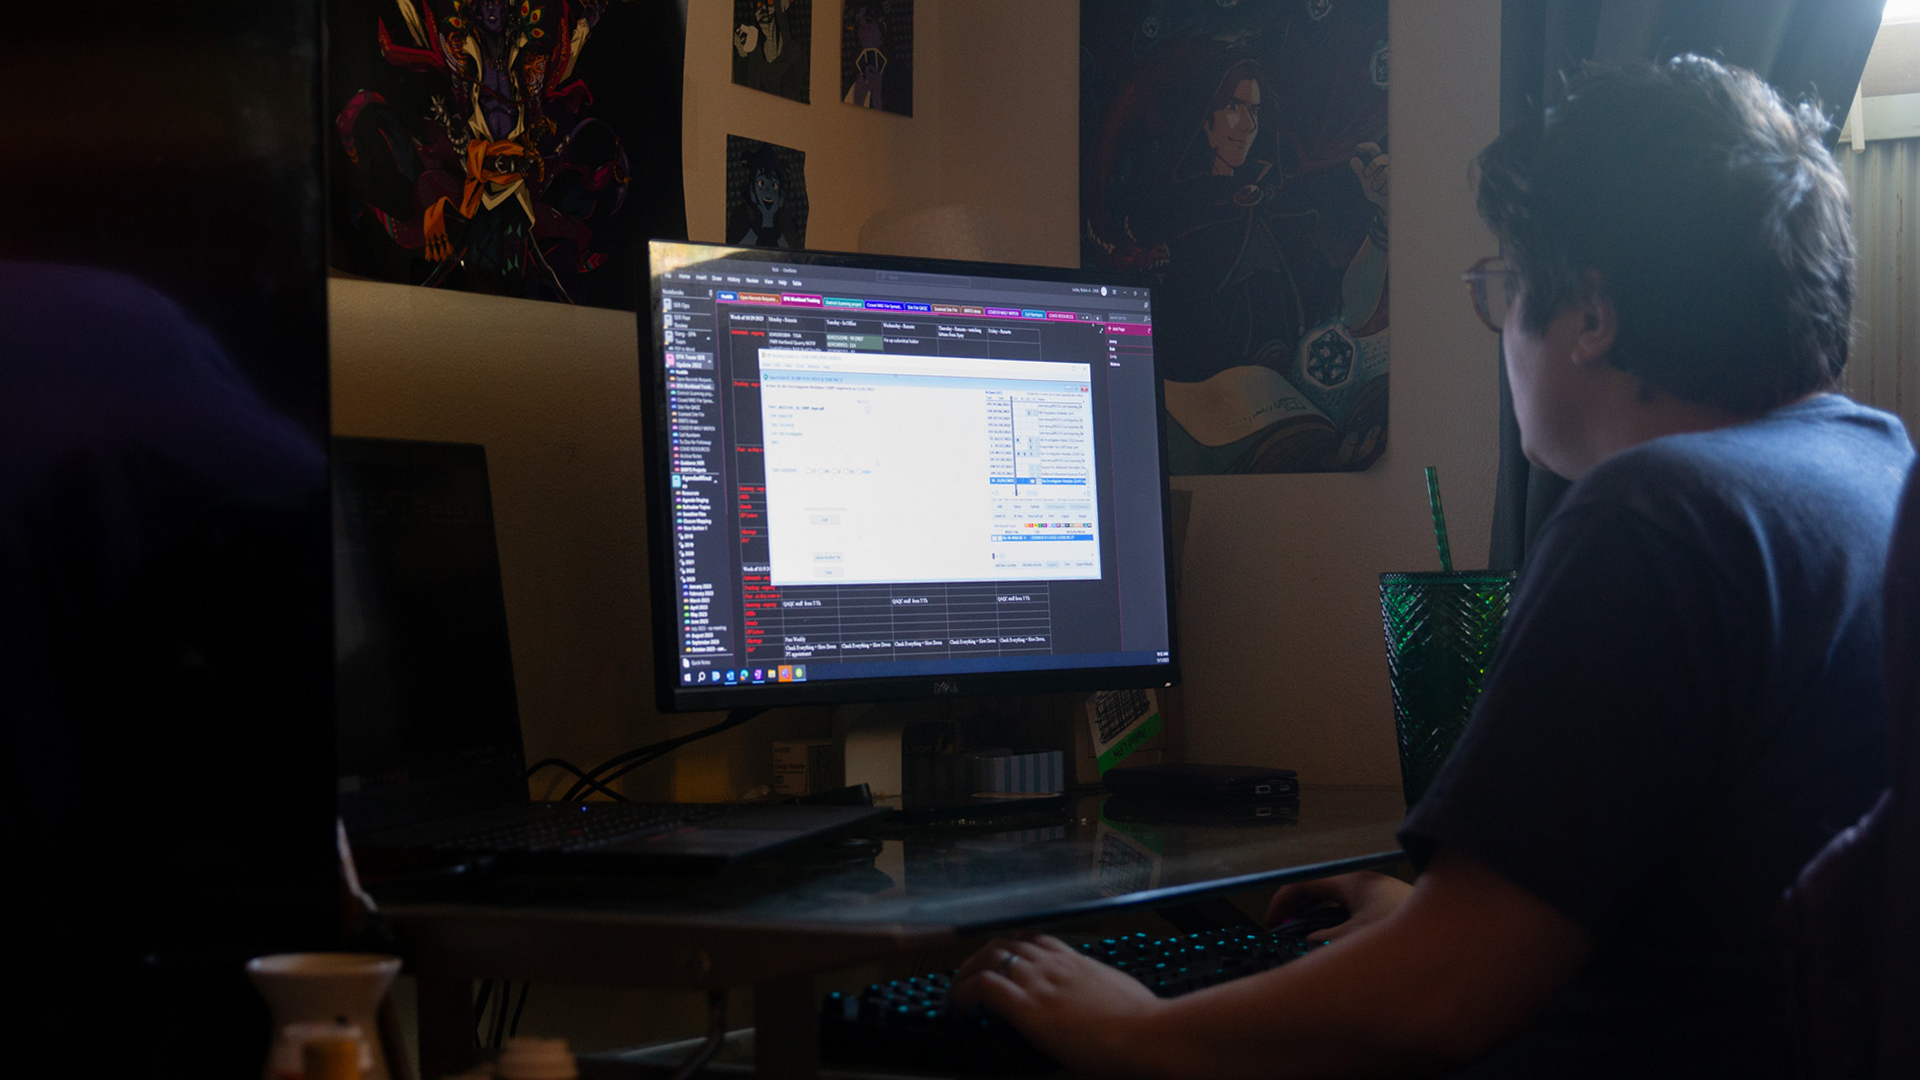 Robin Alexander uses a keyboard while looking at a computer monitor on a desk, in a room with multiple posters on the wall next to a window with open drapes.